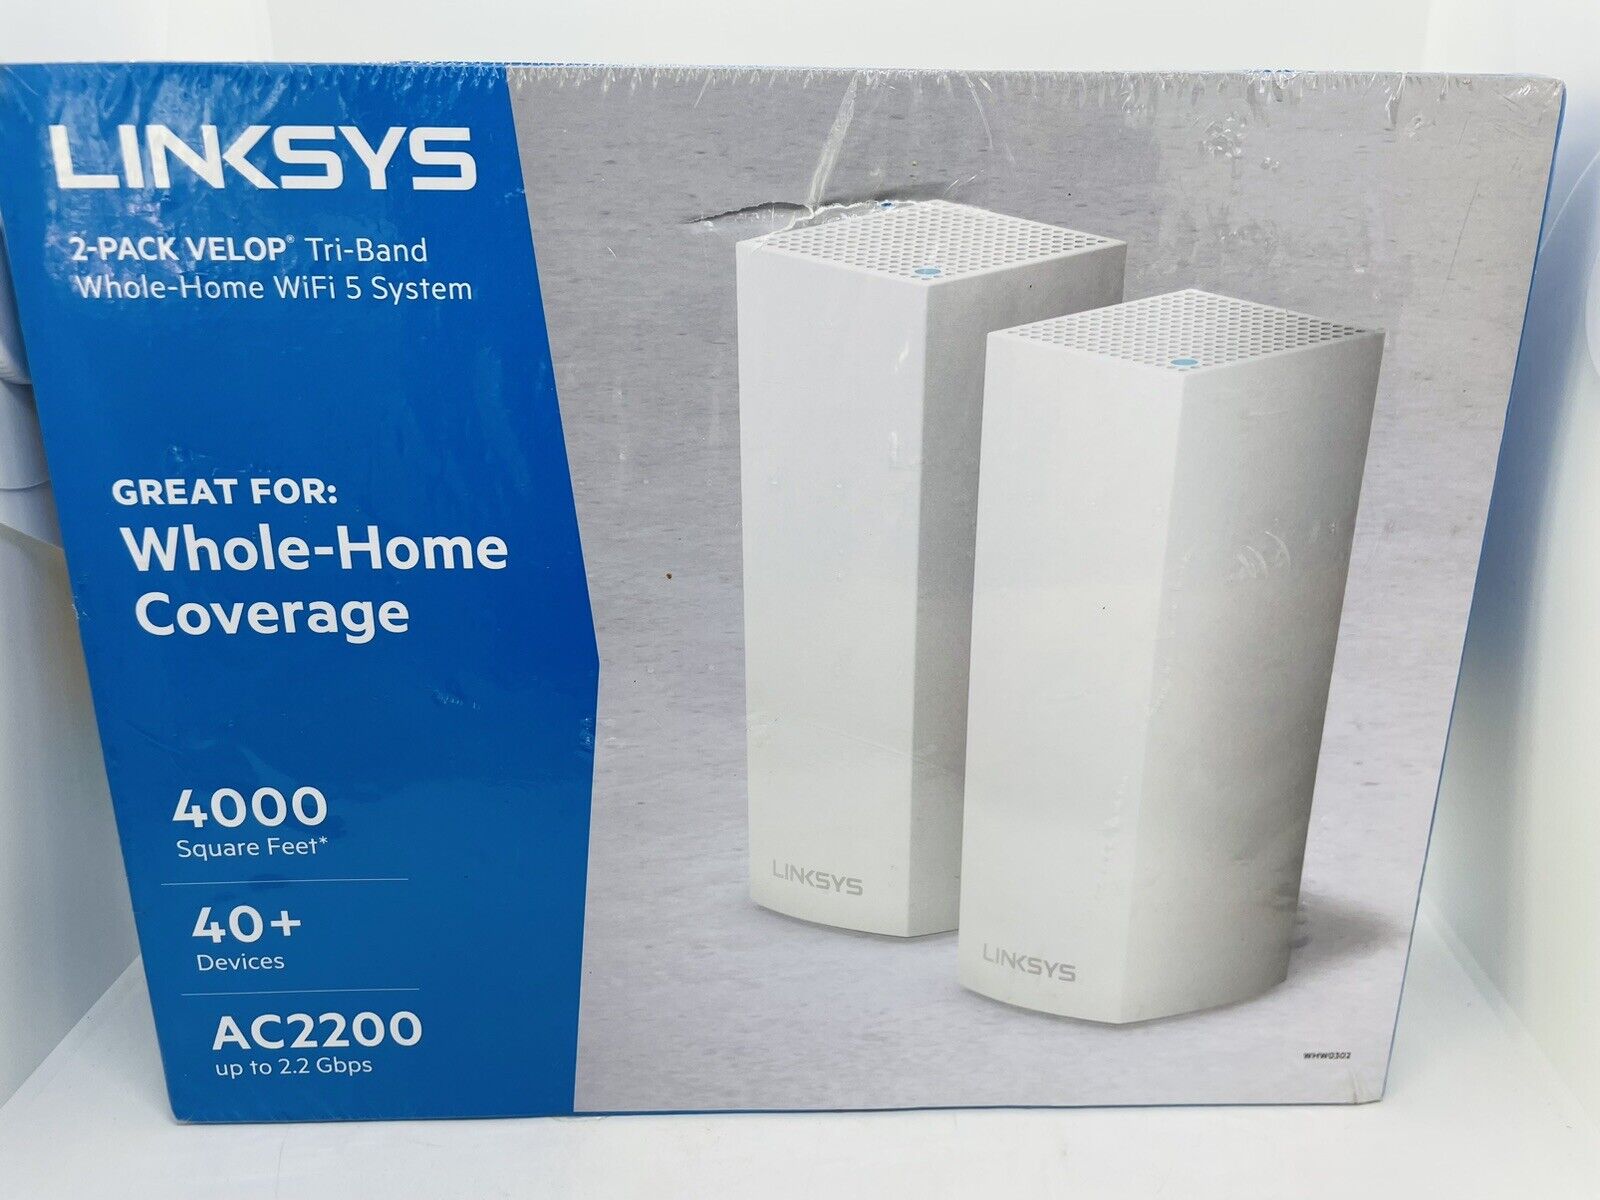 Linksys Whole Home Coverage. 4000 Square Feet. AC2200. 2 Pack WiFi 5 System. New